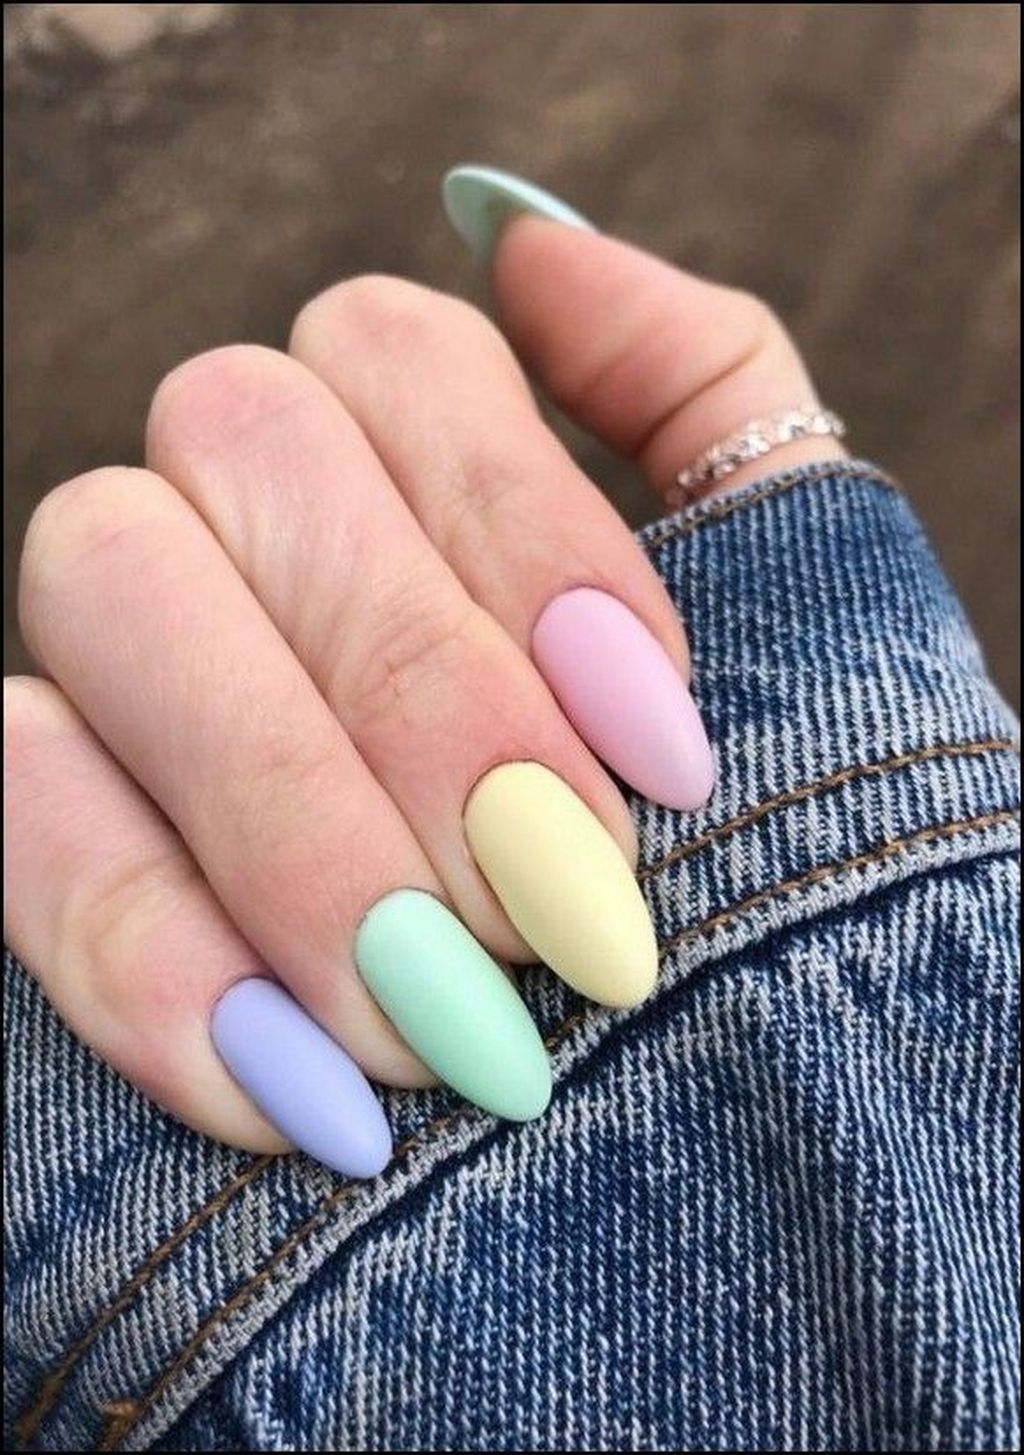 30 Casual Acrylic Nail Art Designs Ideas To Fascinate Your Admirers In 2020 Pastelove Nehty Gelove Nehty Design Nehtu